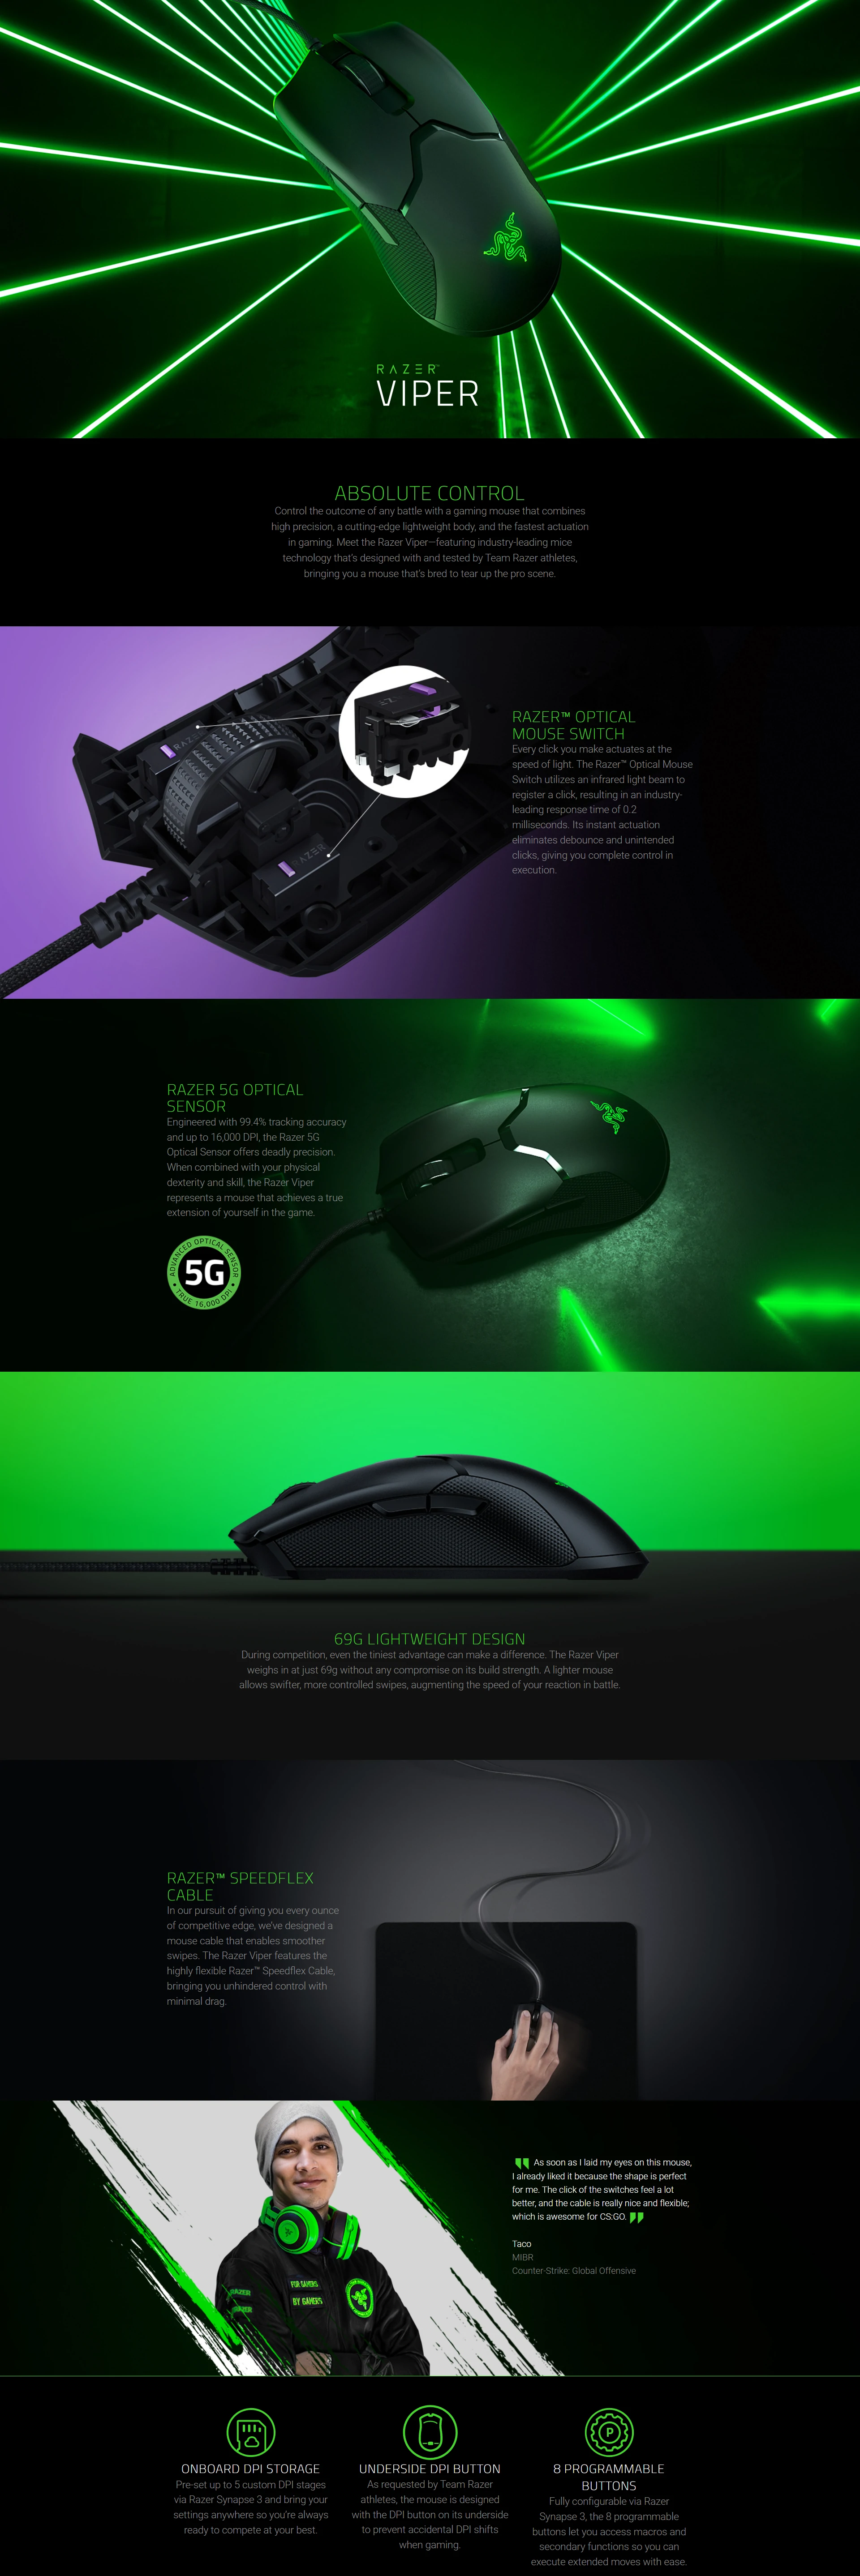 Overview - Razer Viper Ambidextrous Wired Gaming Mouse with Optical Switches